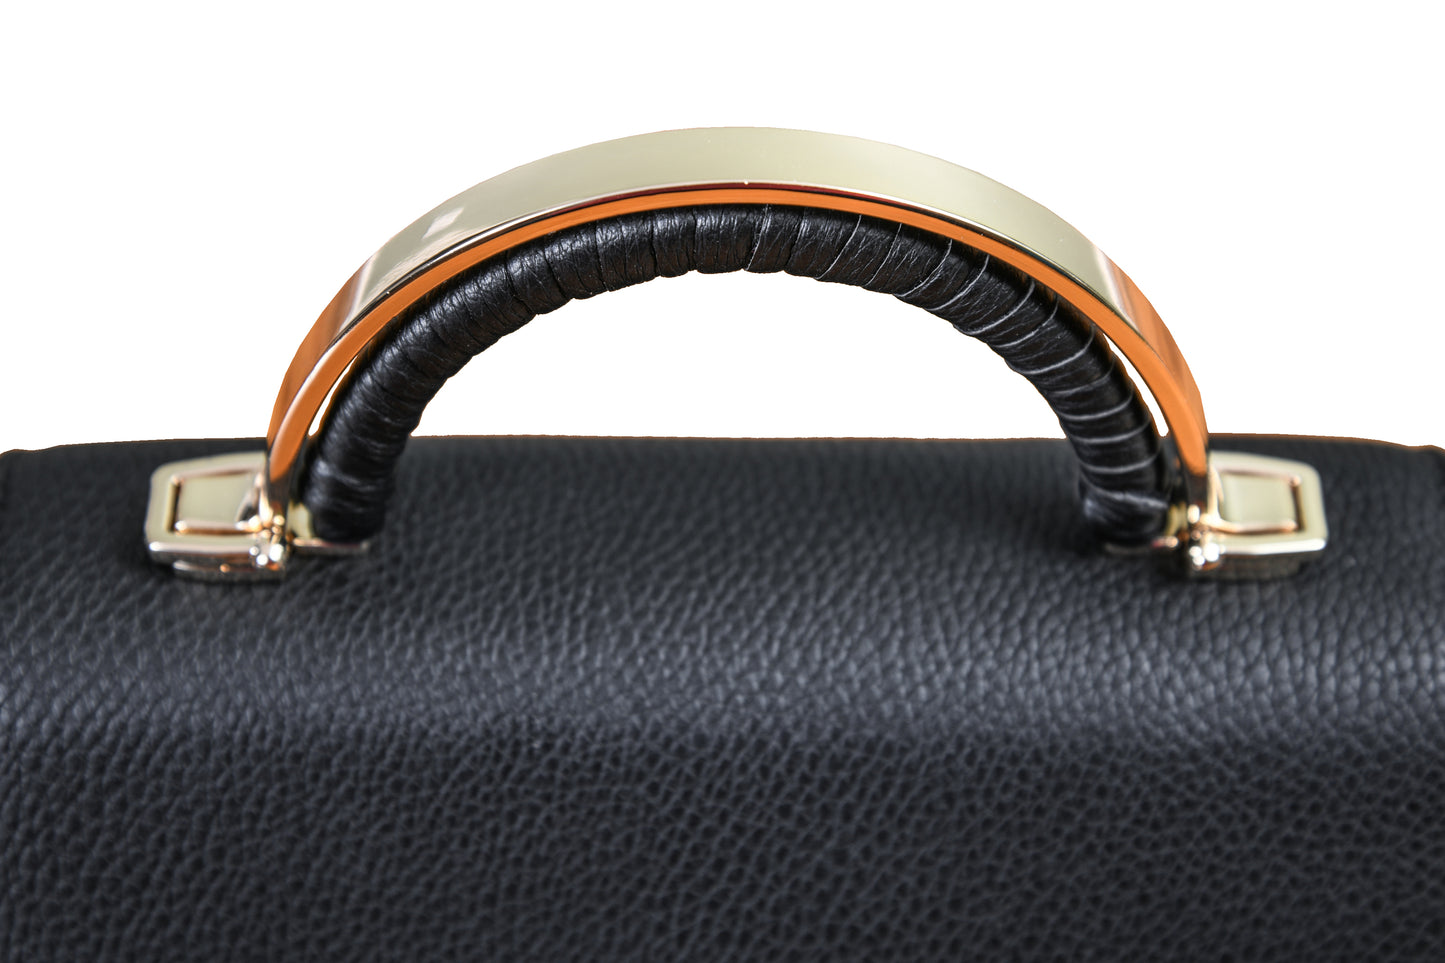 Mini Crossbody Pebble Grain Faux Leather Midnight Black Handbag made by Dewi Maya gold arched handle available at the best boutique in Upstate South Carolina Spartanburg Greenville Dewi Maya Boutique